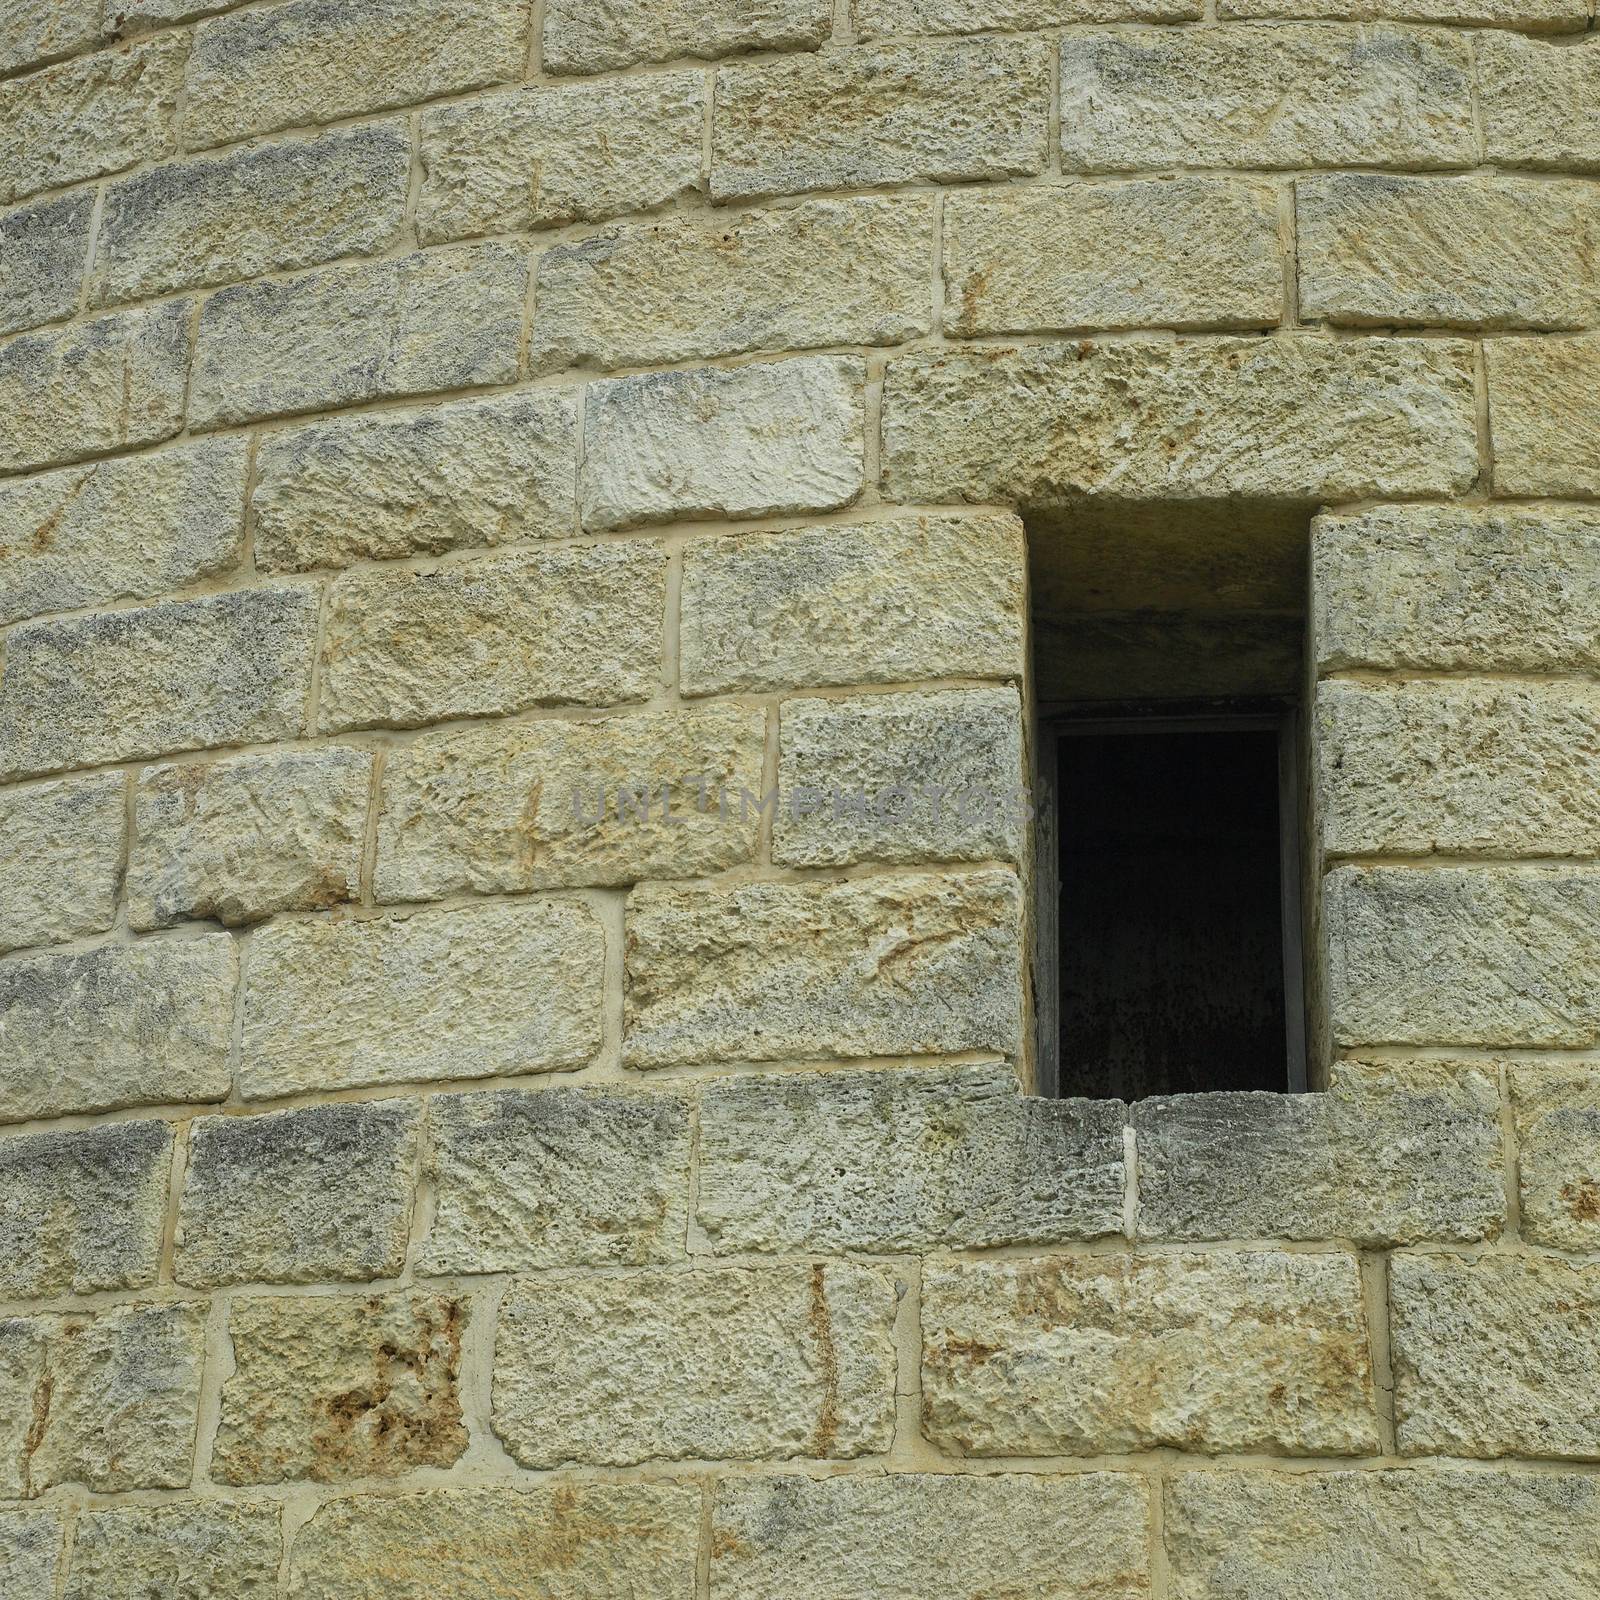 Deep cut out window in the side of a brick cylindrical castle